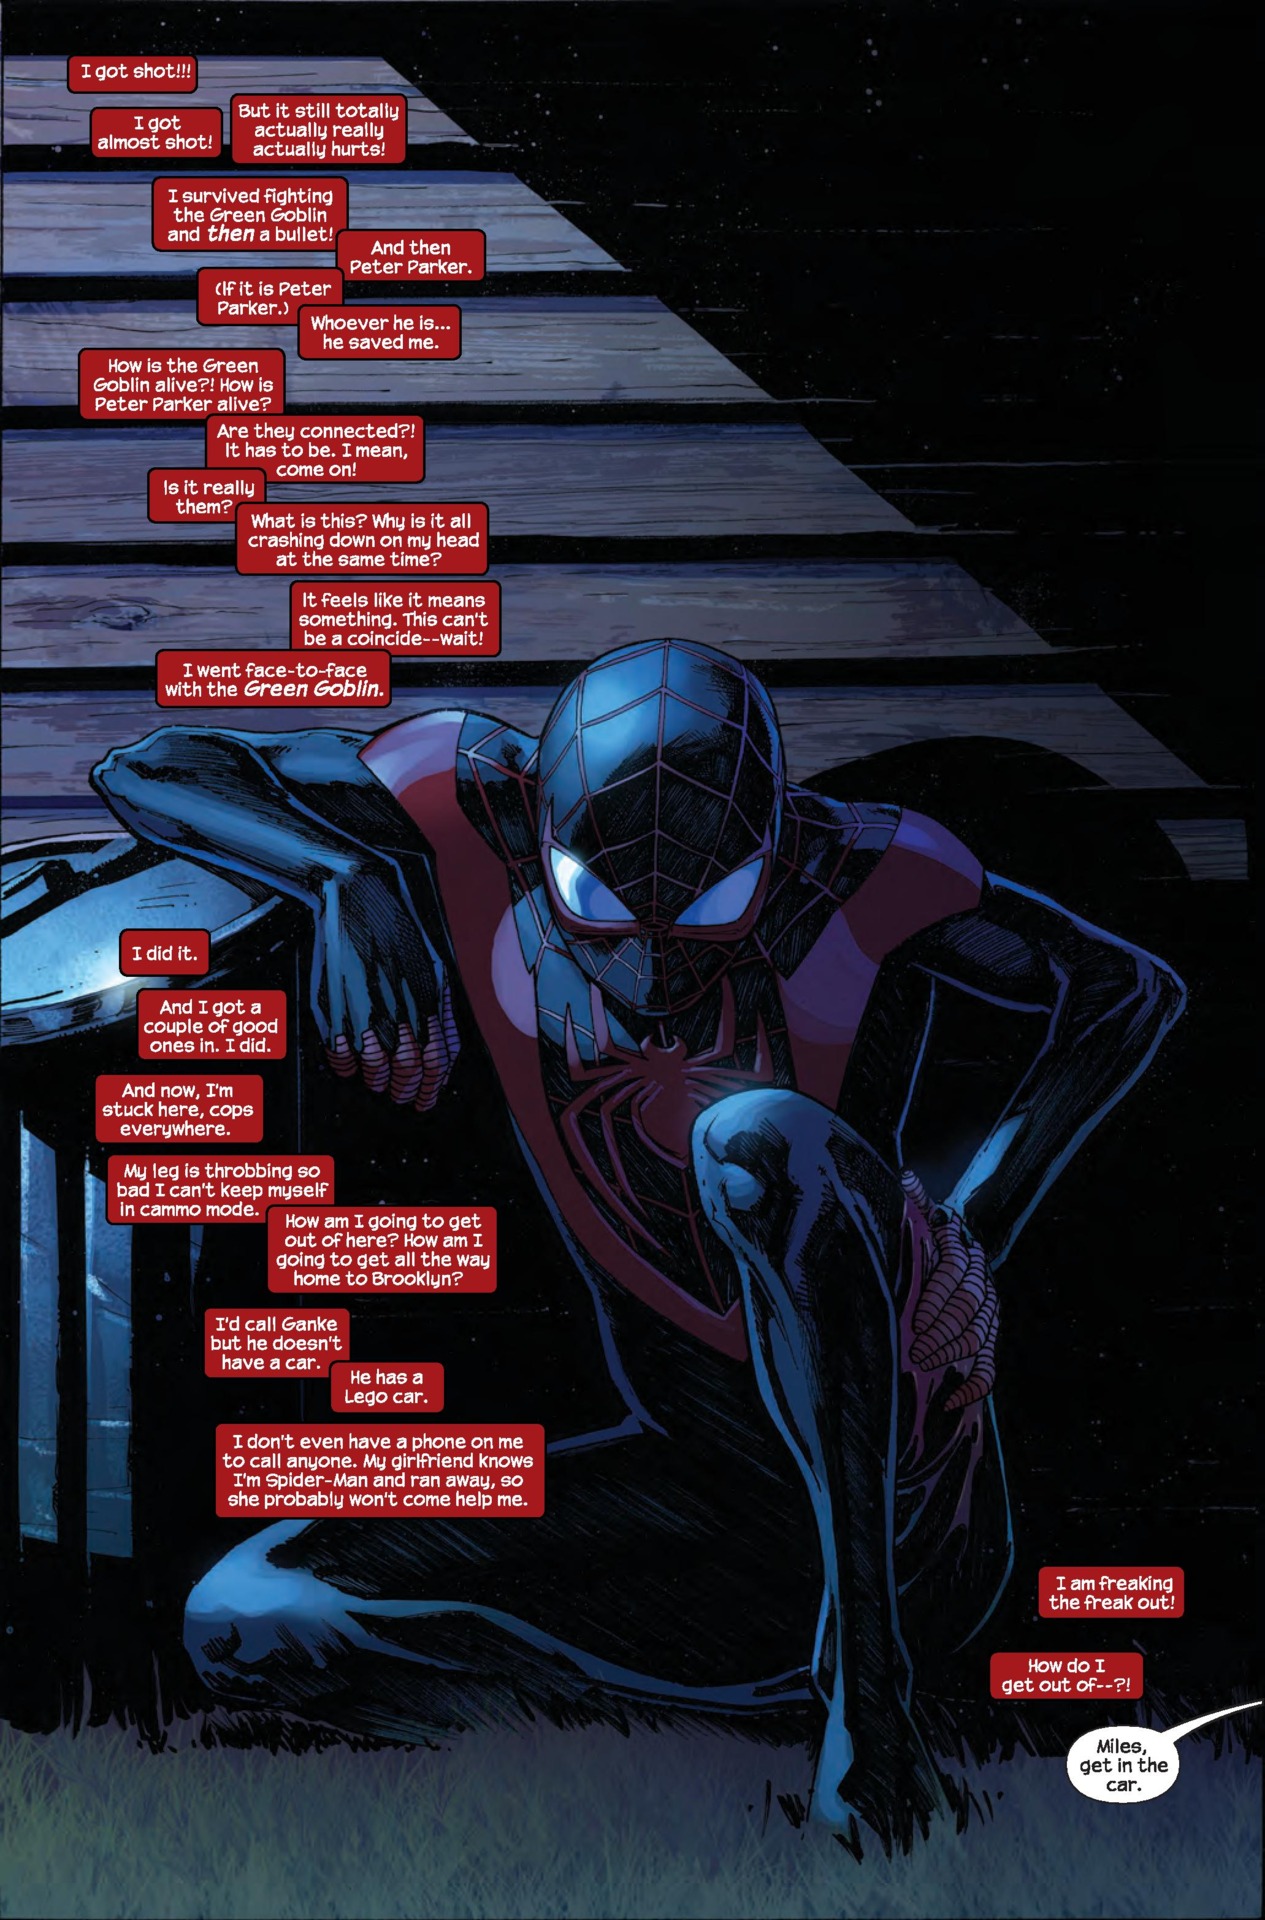 Miles Morales Ultimate Spider-Man #5 preview